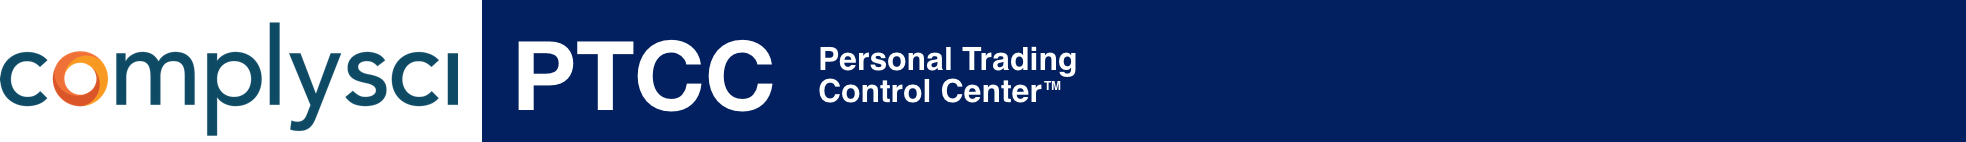 Personal Trading Control Center by Compliance Science